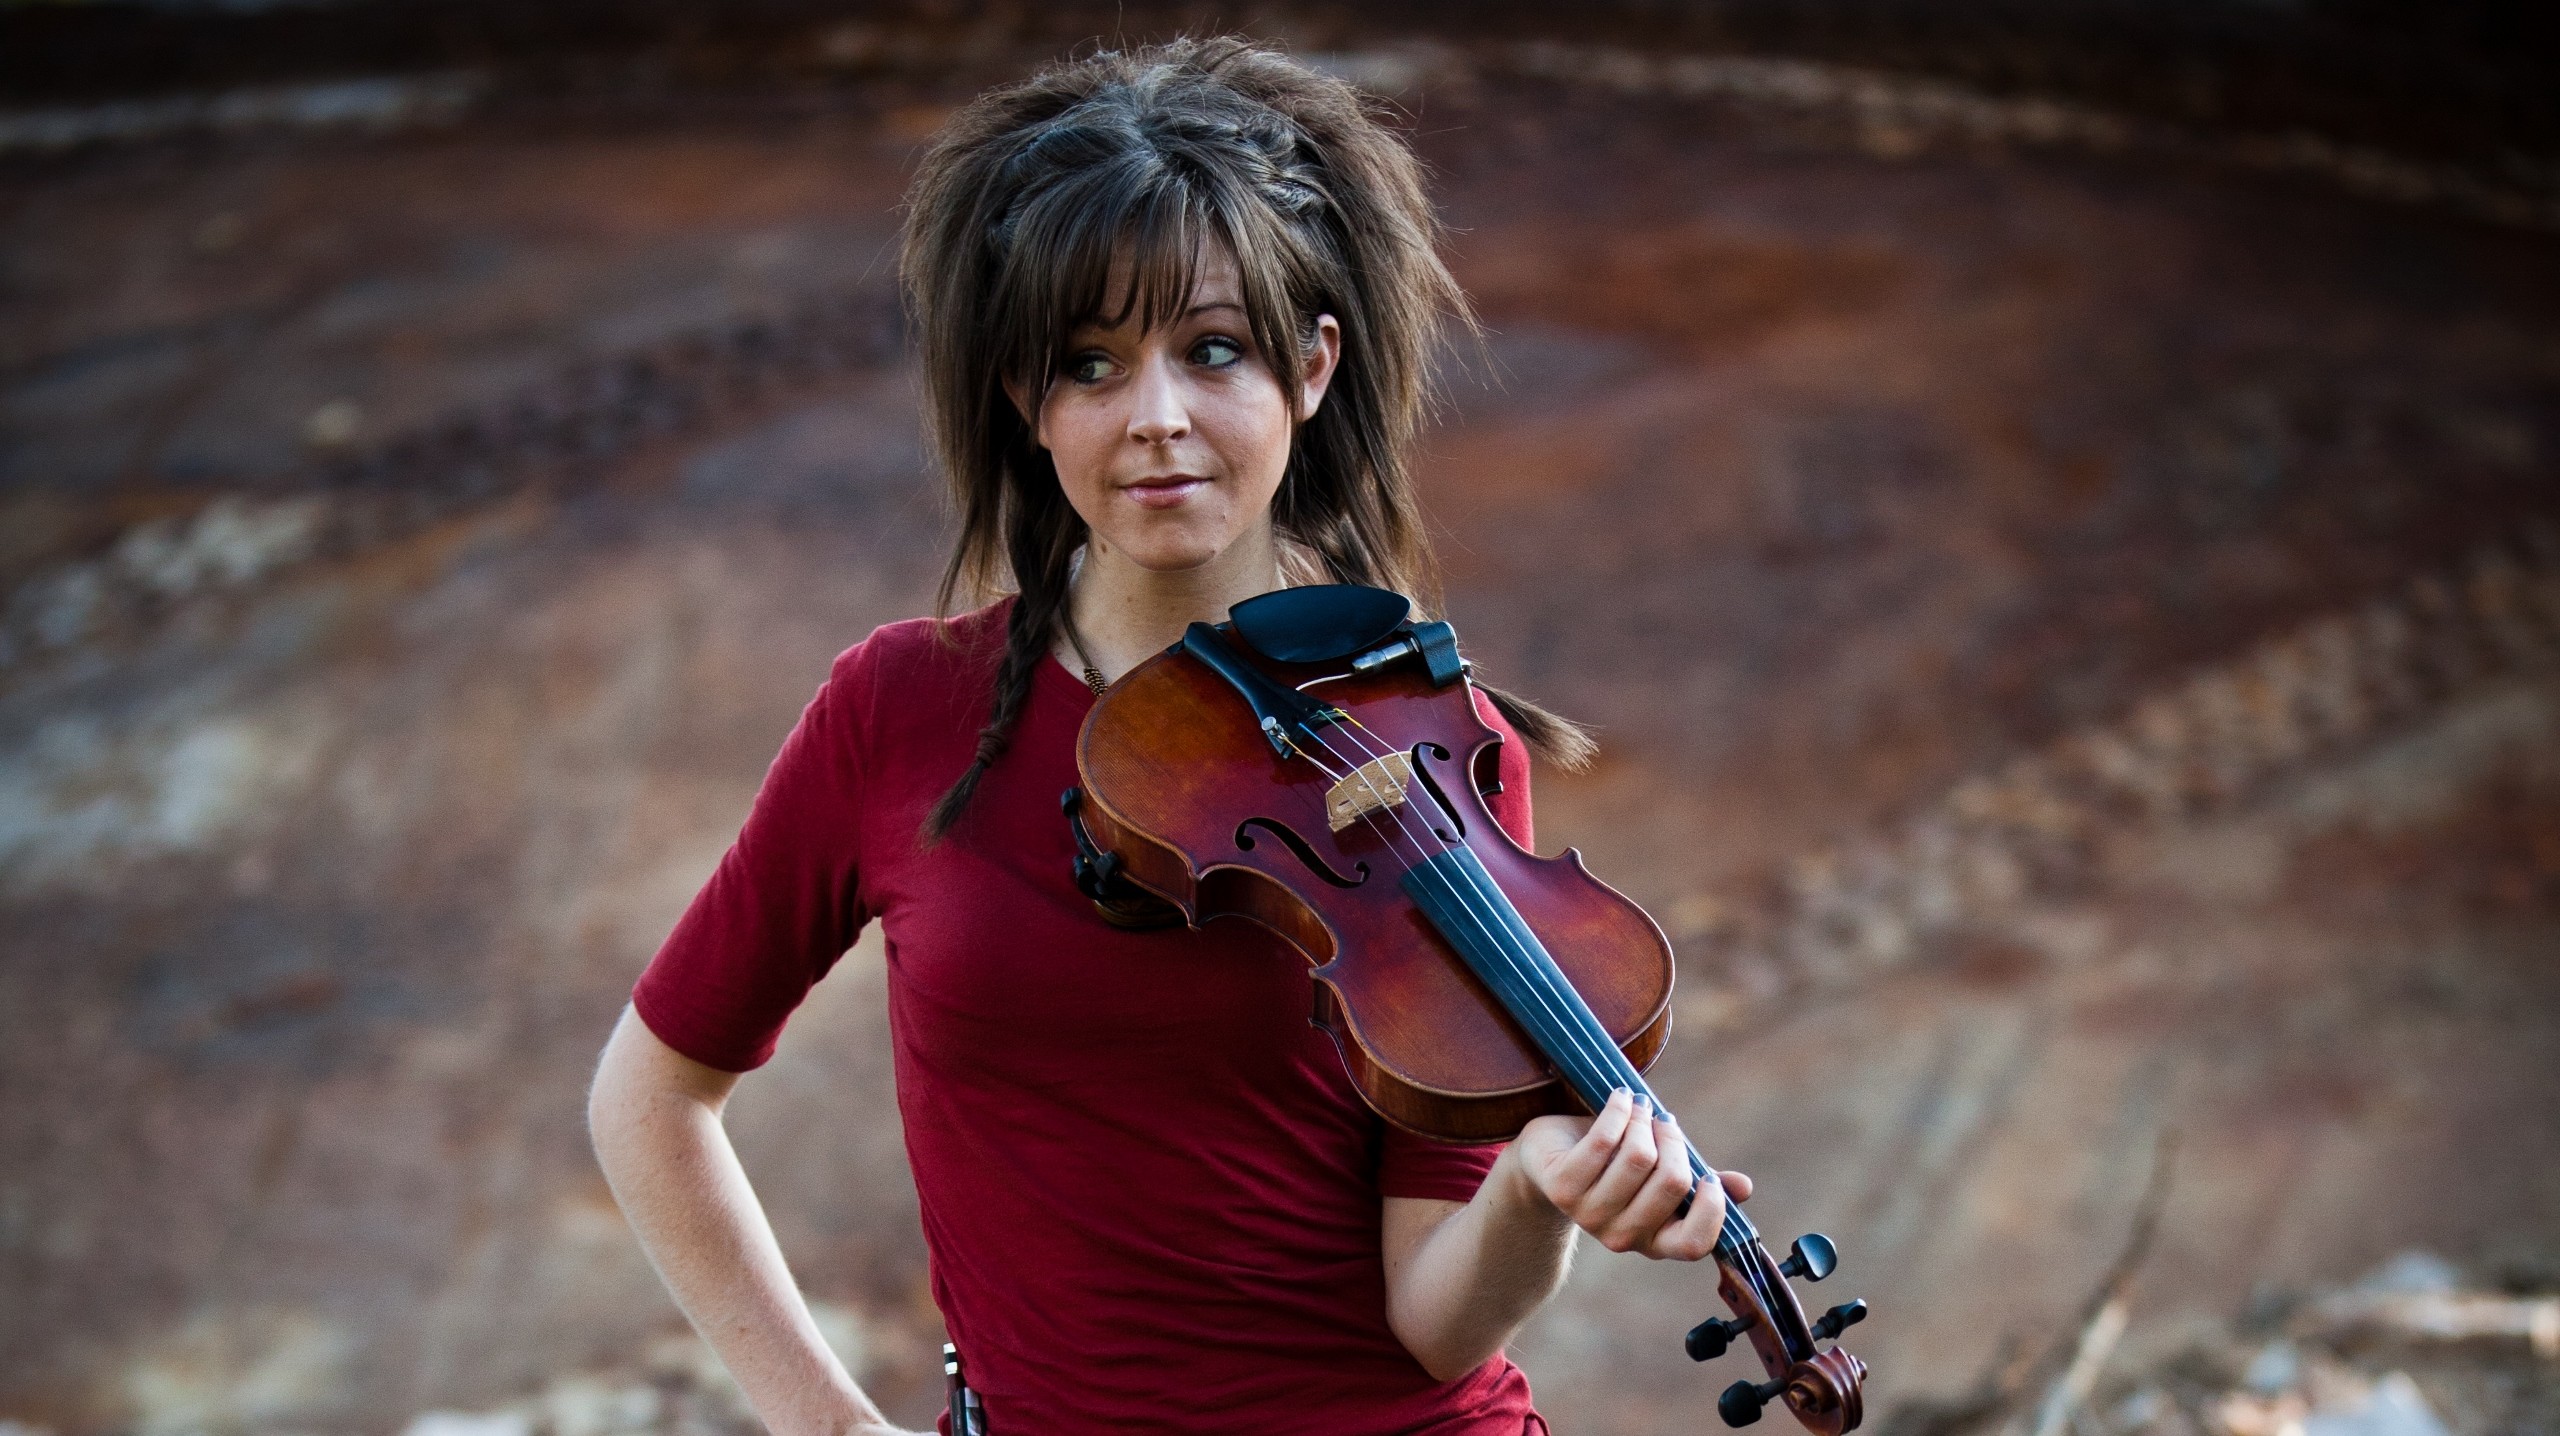 People 2560x1436 Lindsey Stirling violin women musician women outdoors musical instrument red t-shirt